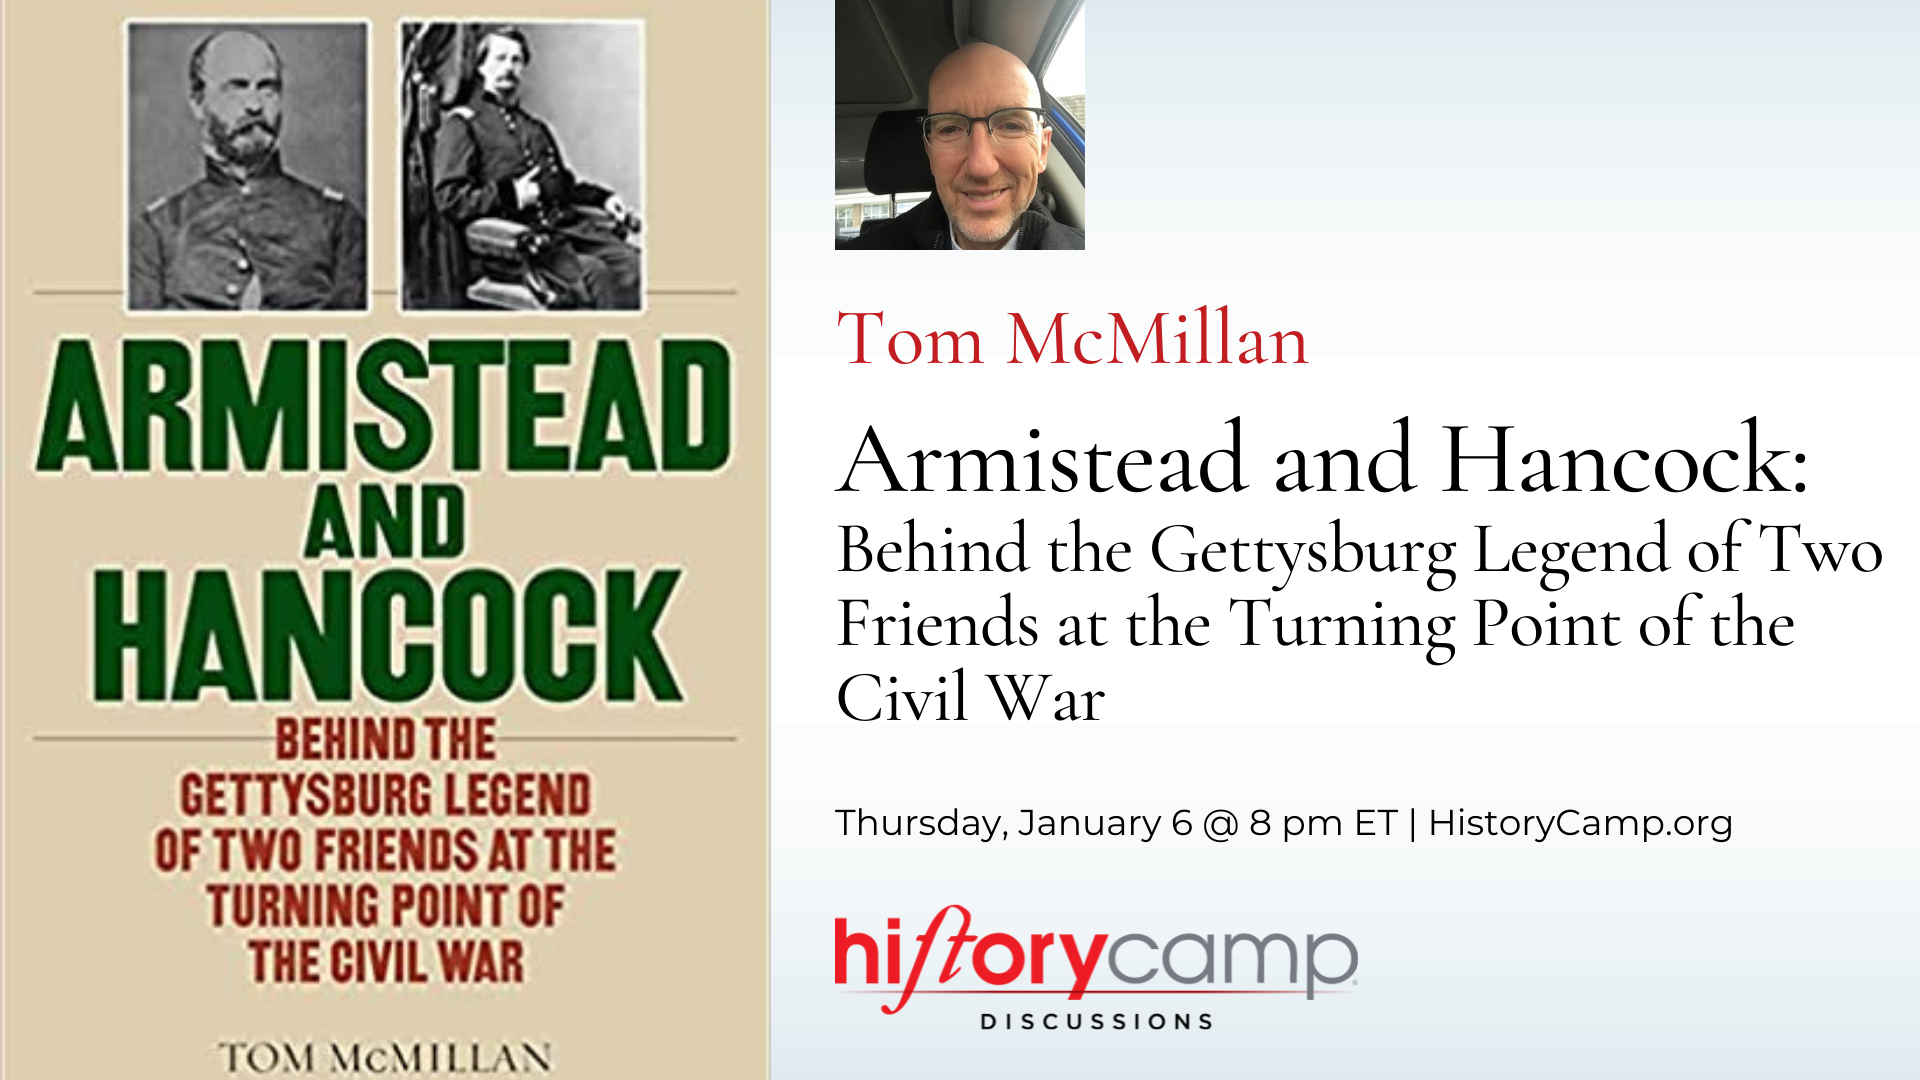 Tom McMillan—Armistead and Hancock: Behind the Gettysburg Legend of Two Friends at the Turning Point of the Civil War